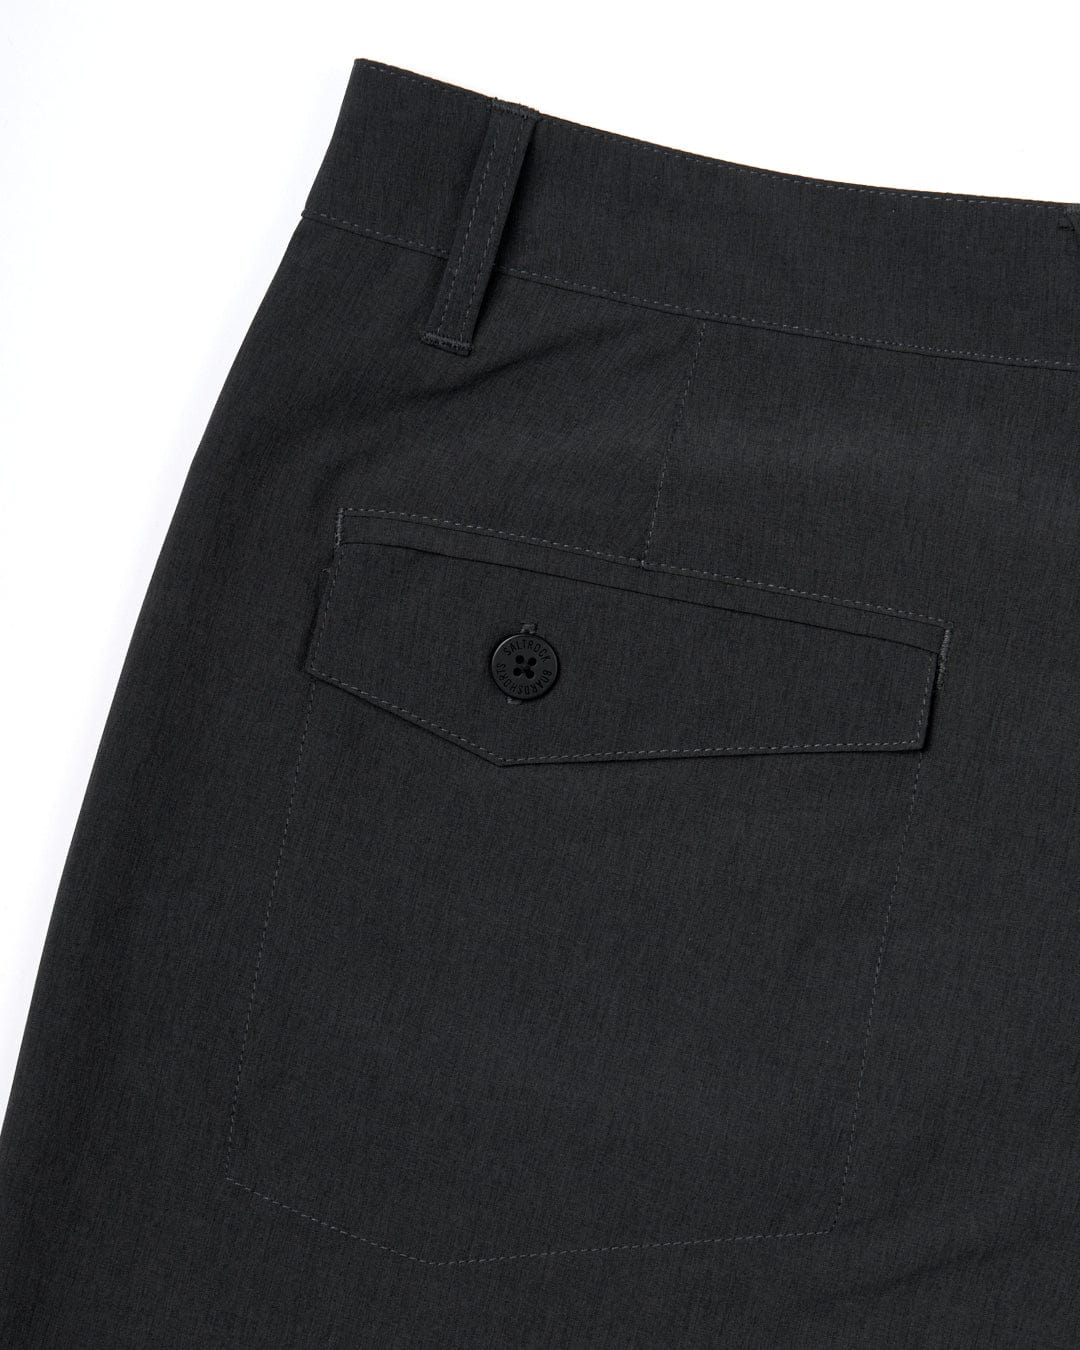 A close up of black Saltrock Amphibian 2 - Mens Hybrid Boardshorts with belt loops and Spandex.